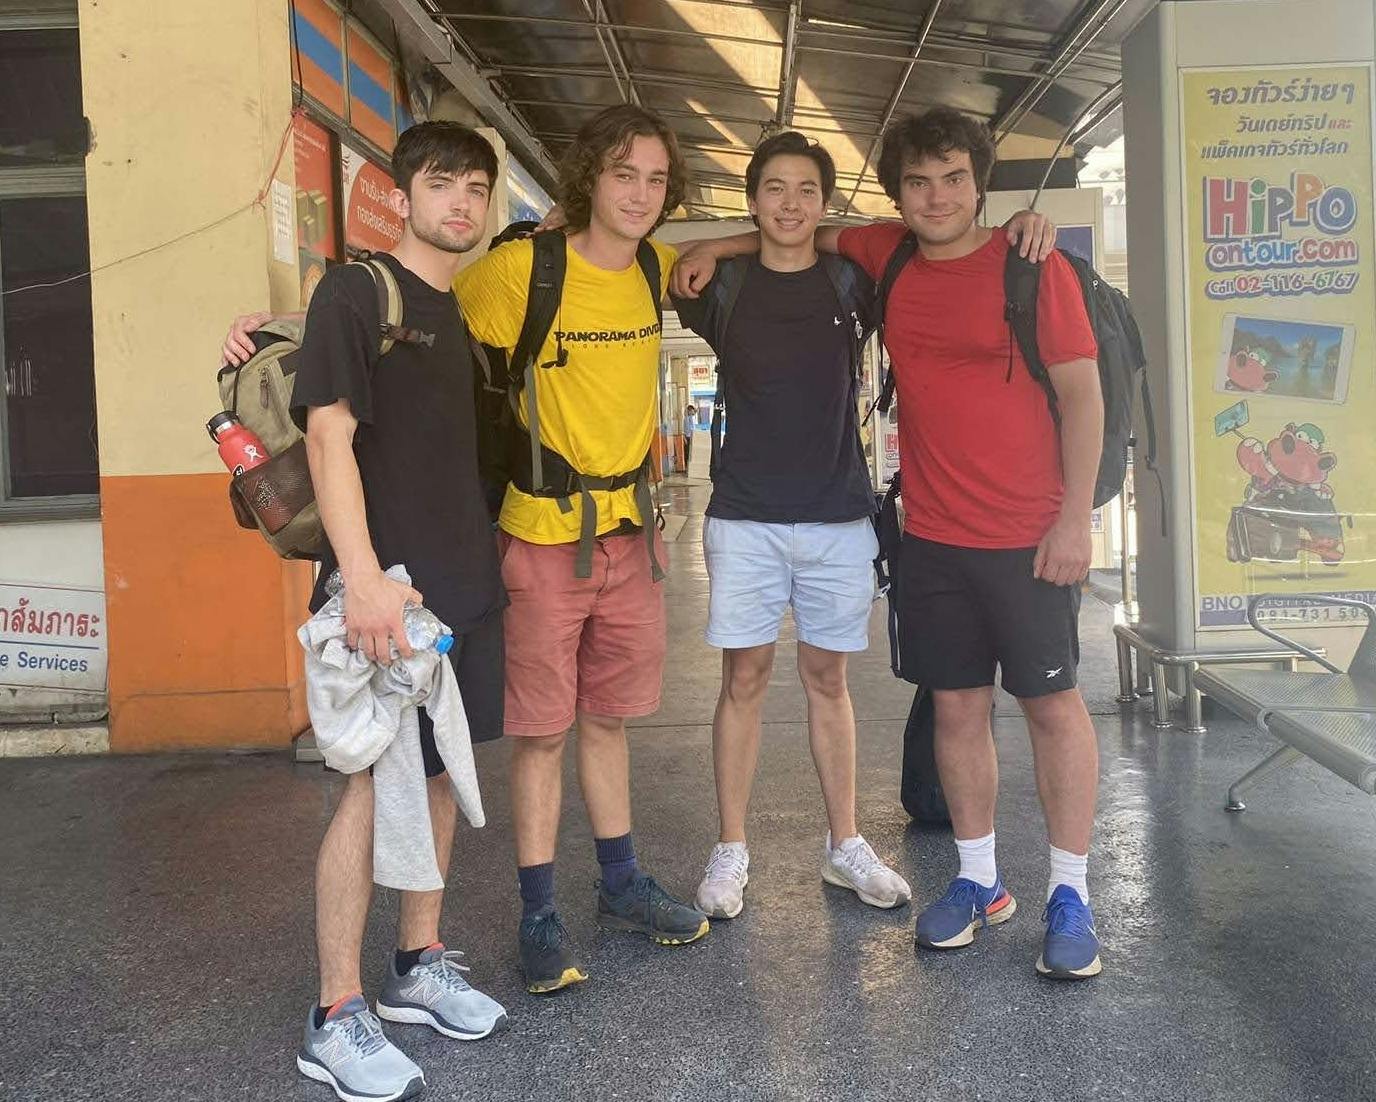 Me (left) with friends in Thailand